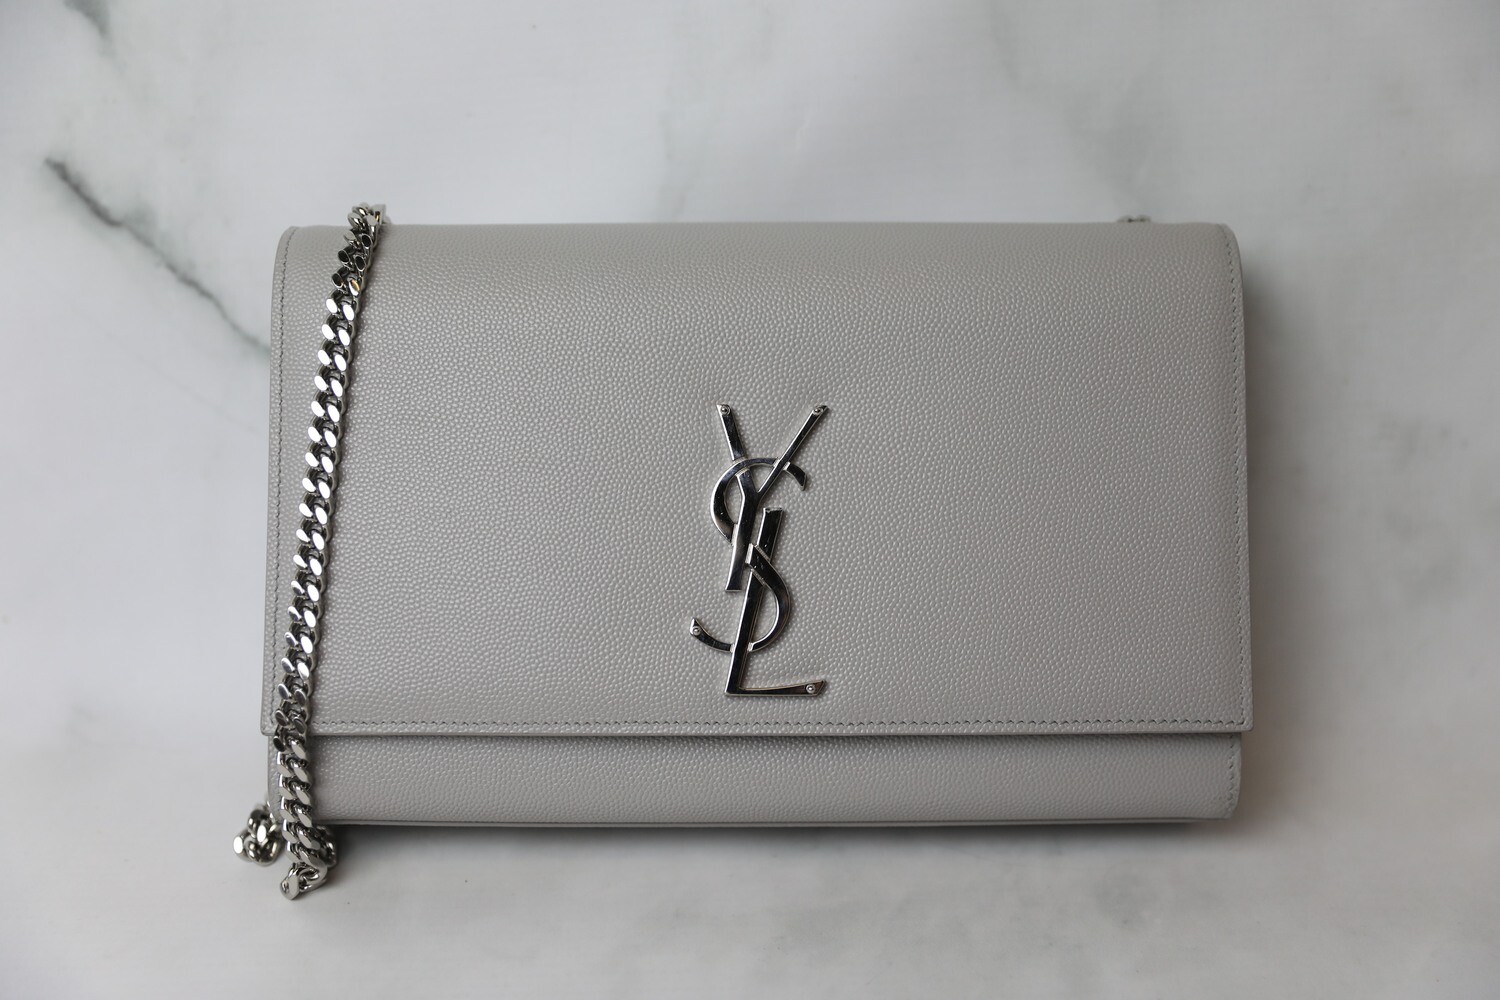 Saint Laurent Kate Medium, Grey Grained Leather with Silver Hardware, Preowned no Dustbag WA001